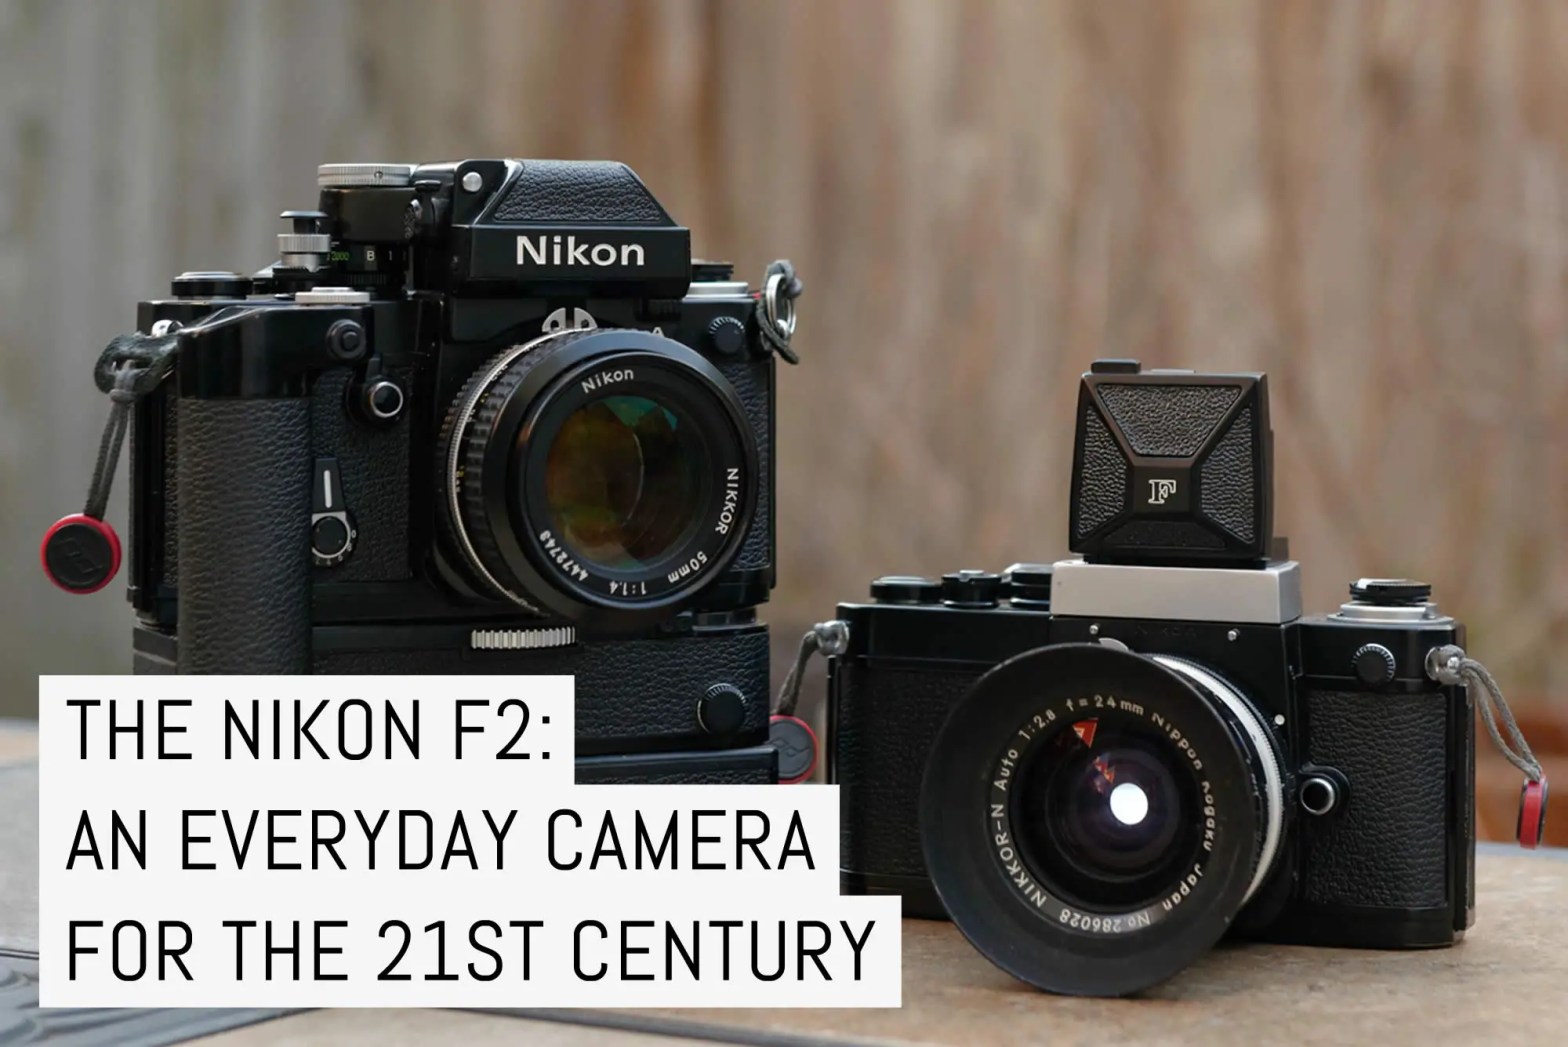 The Nikon F2: an everyday camera for the 21st Century